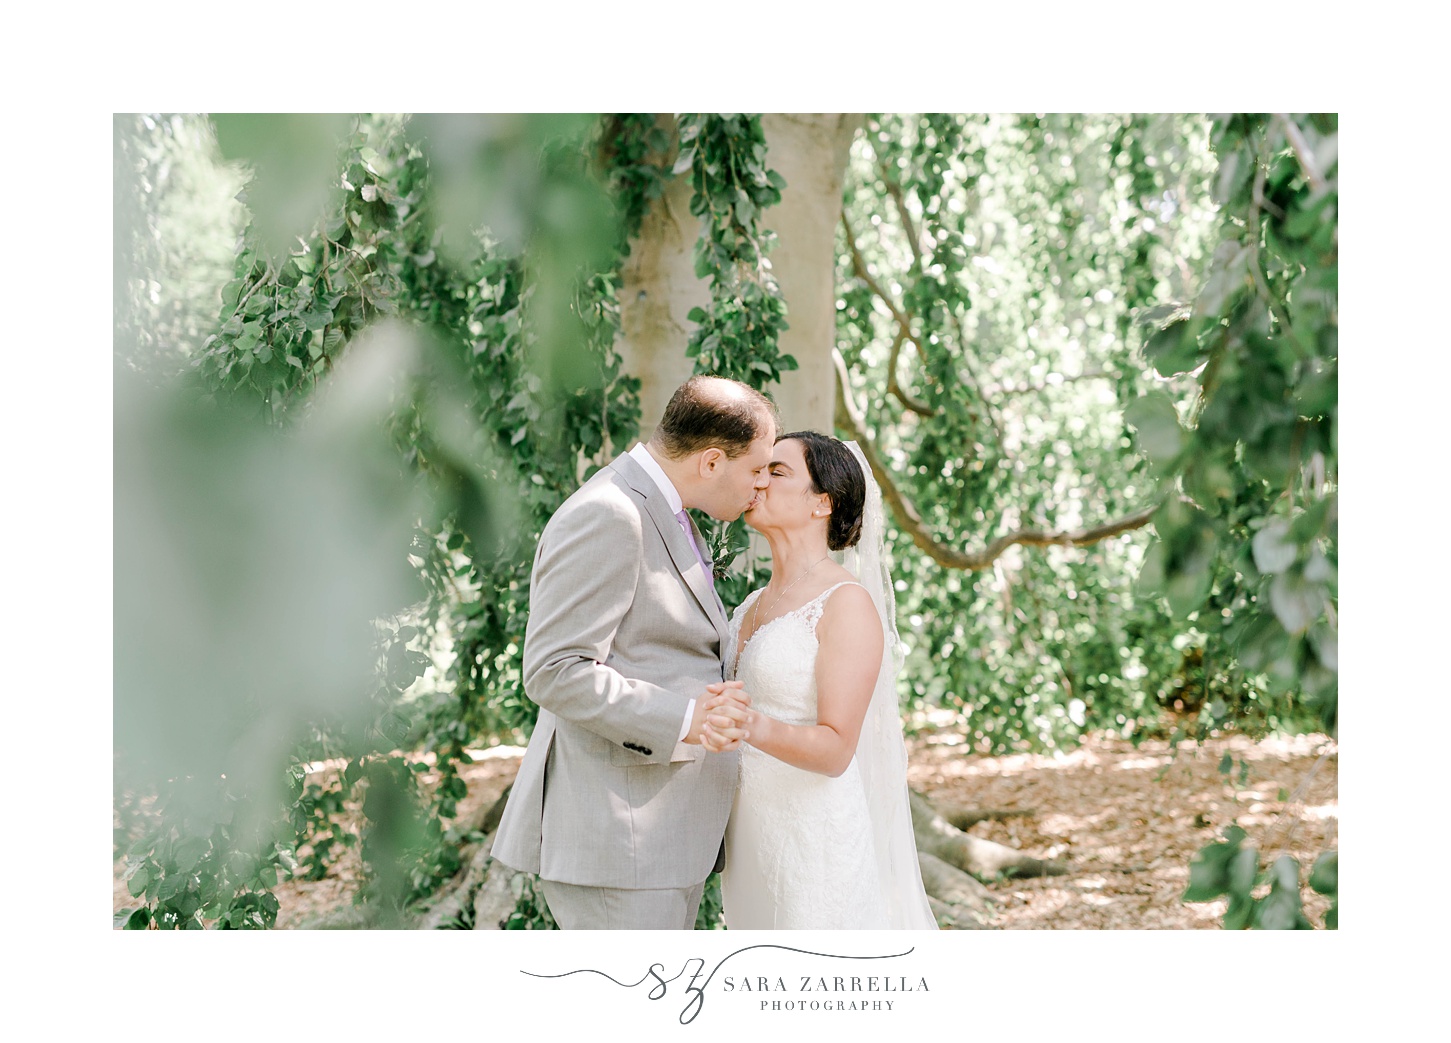 groom leans in to kiss bride during portraits under weeping willow tree